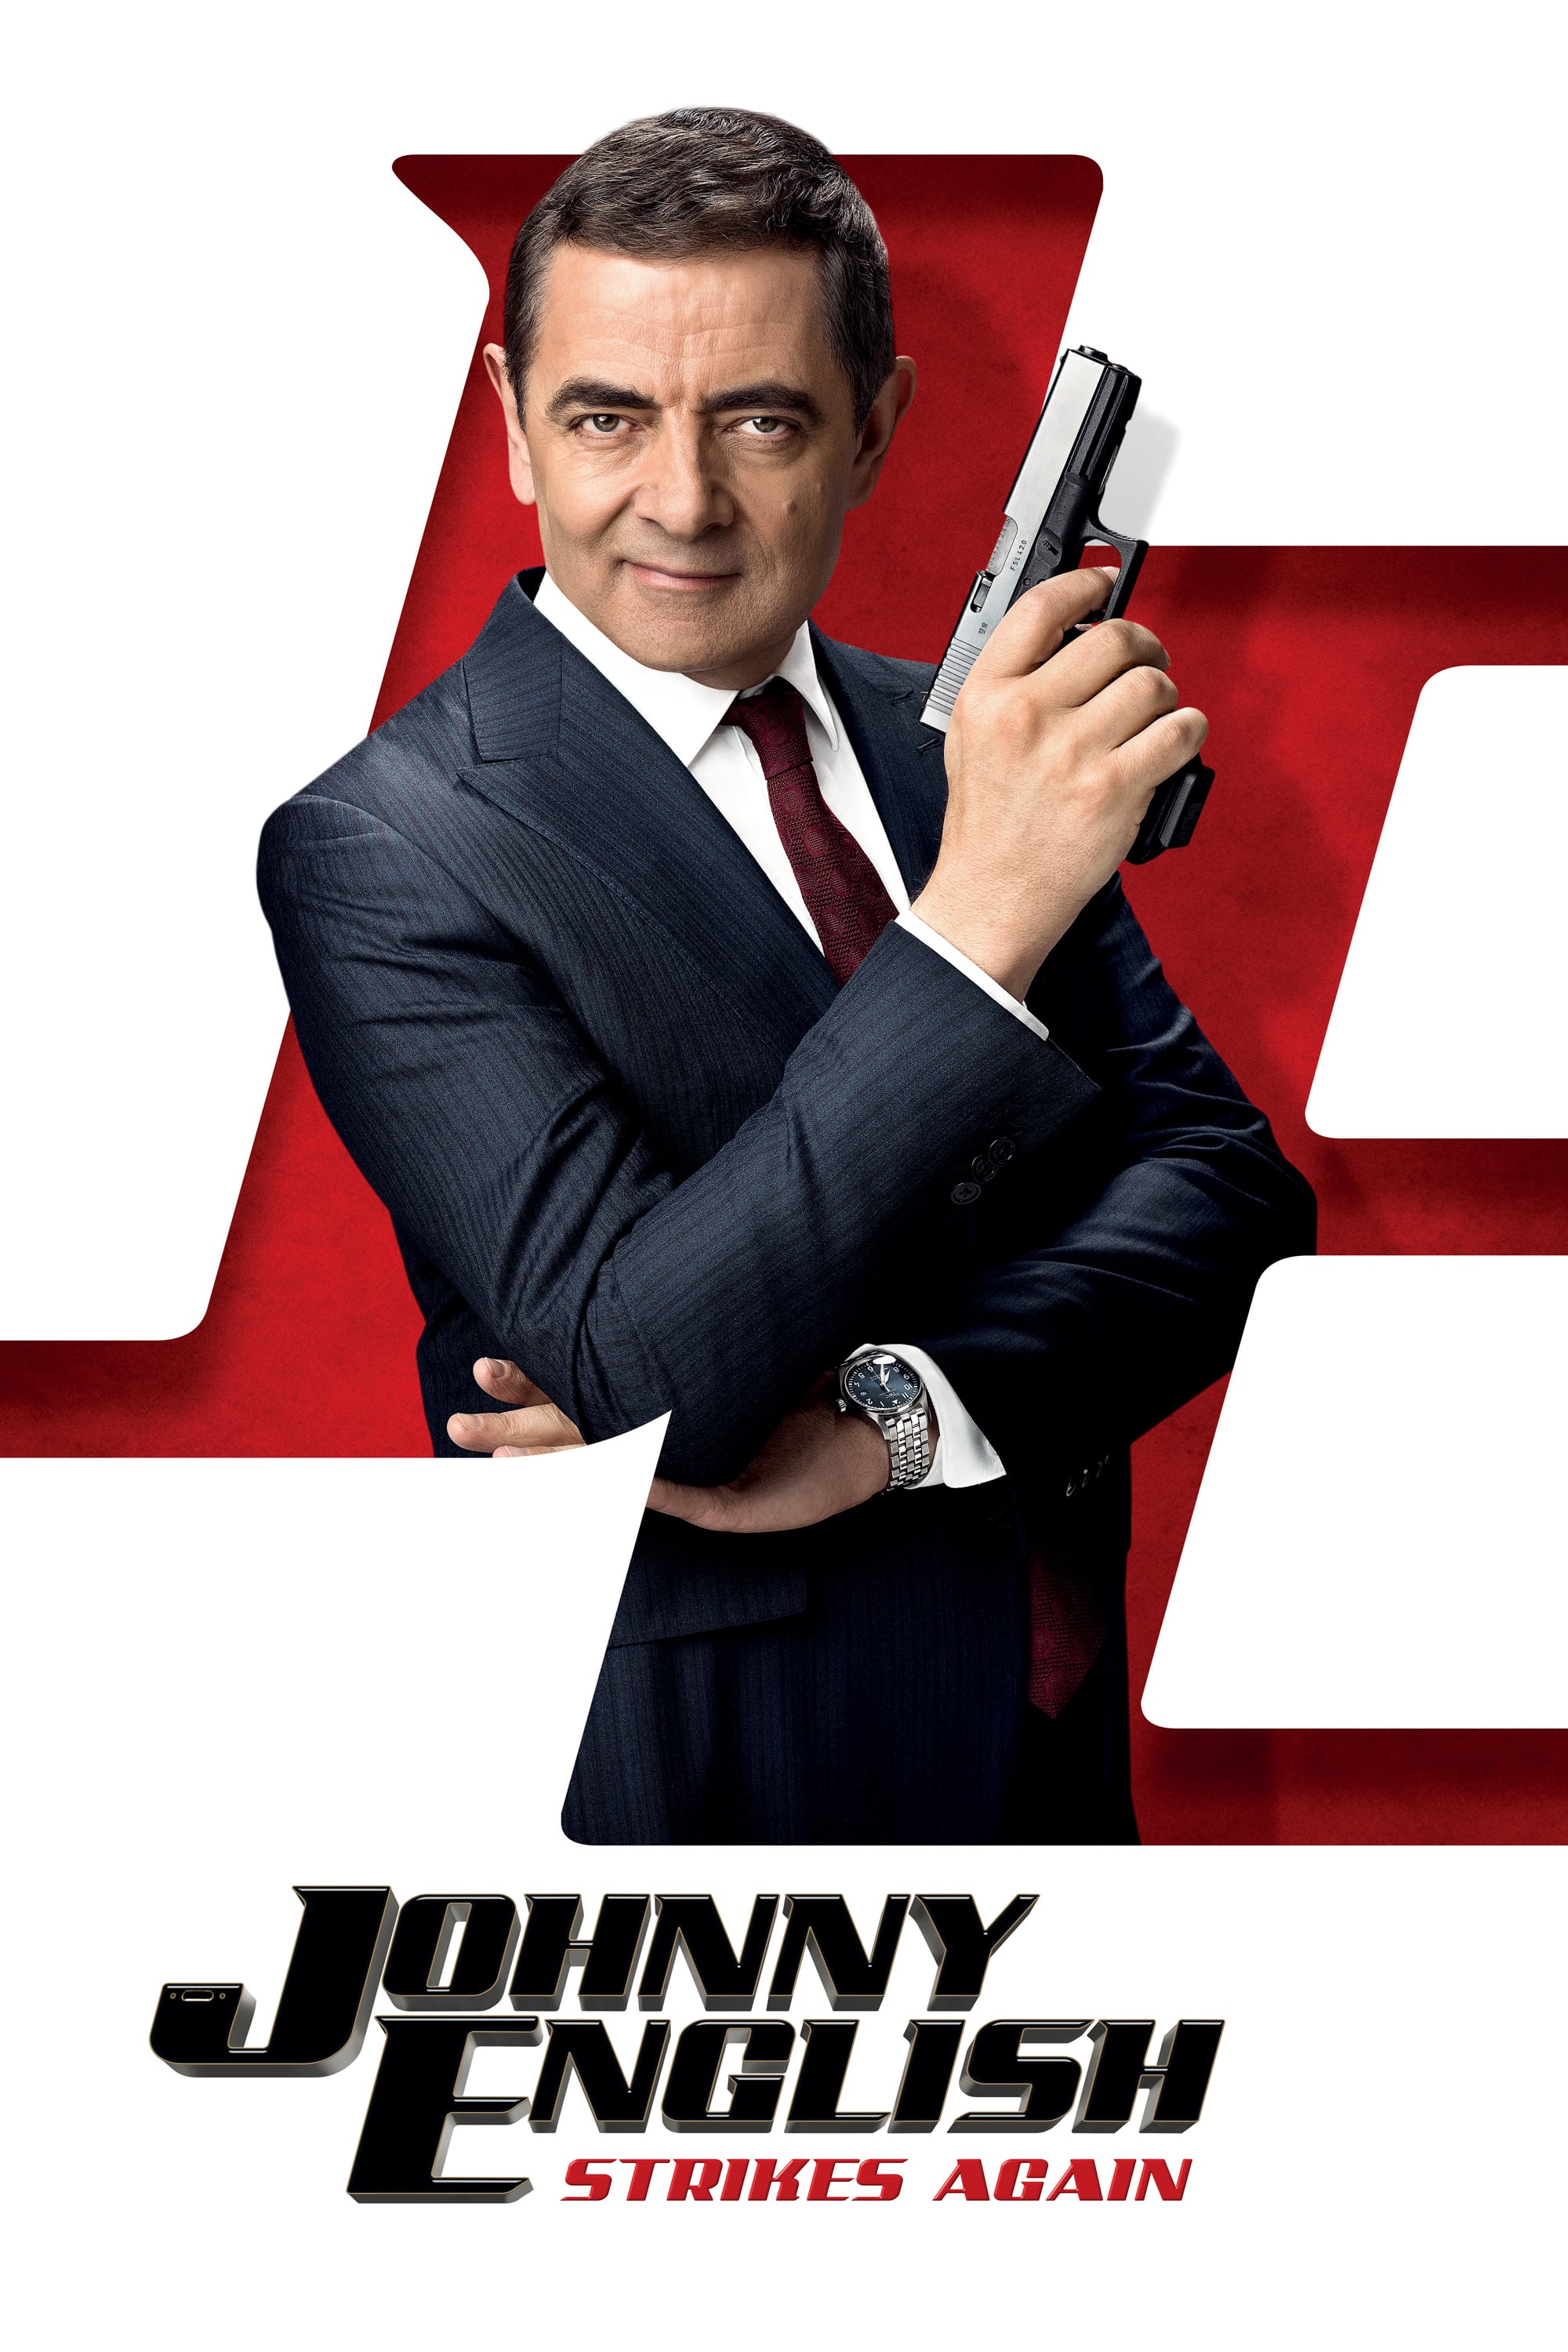 Johnny English Strikes Again (2018) Official Trailer #2